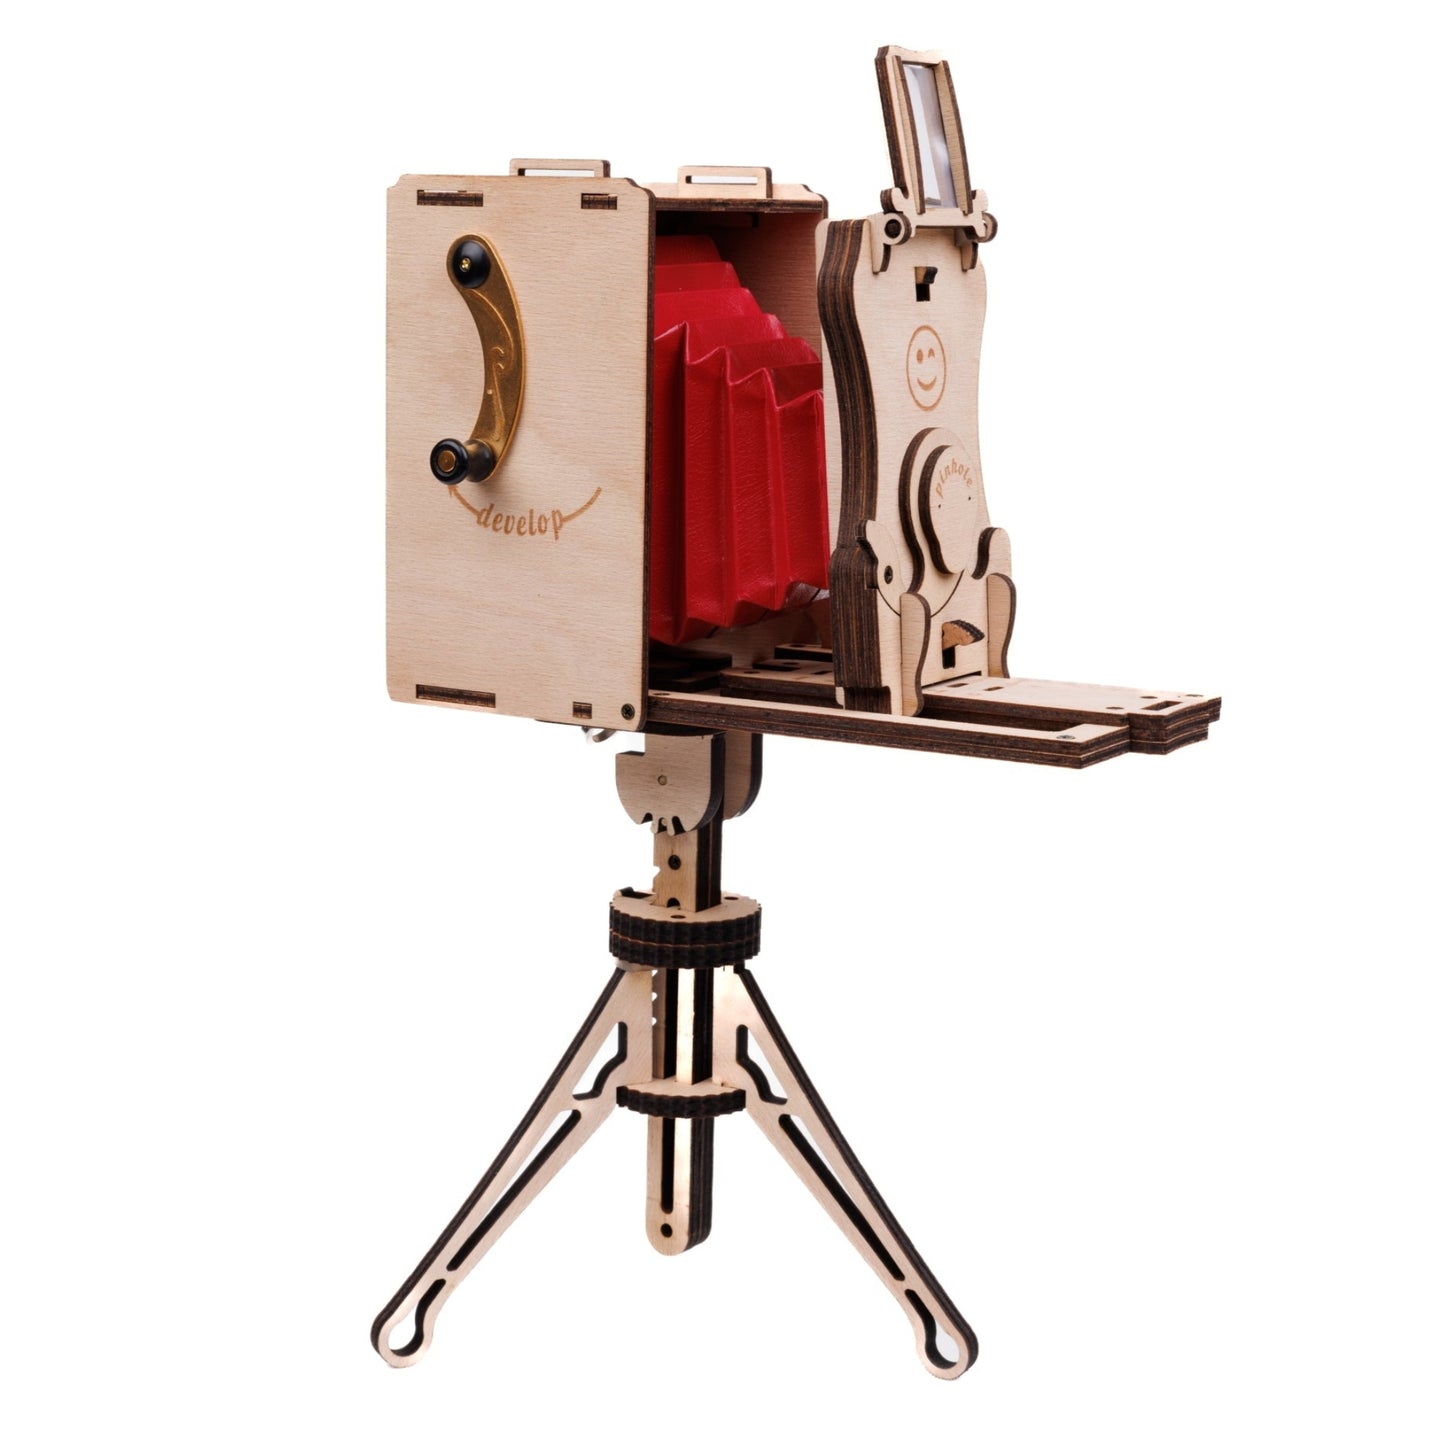 Unfolded Pinhole Mini A Decorative DIY Natural Wood plywood tripod kit for self-assembly. Works with any Jollylook instant film camera.